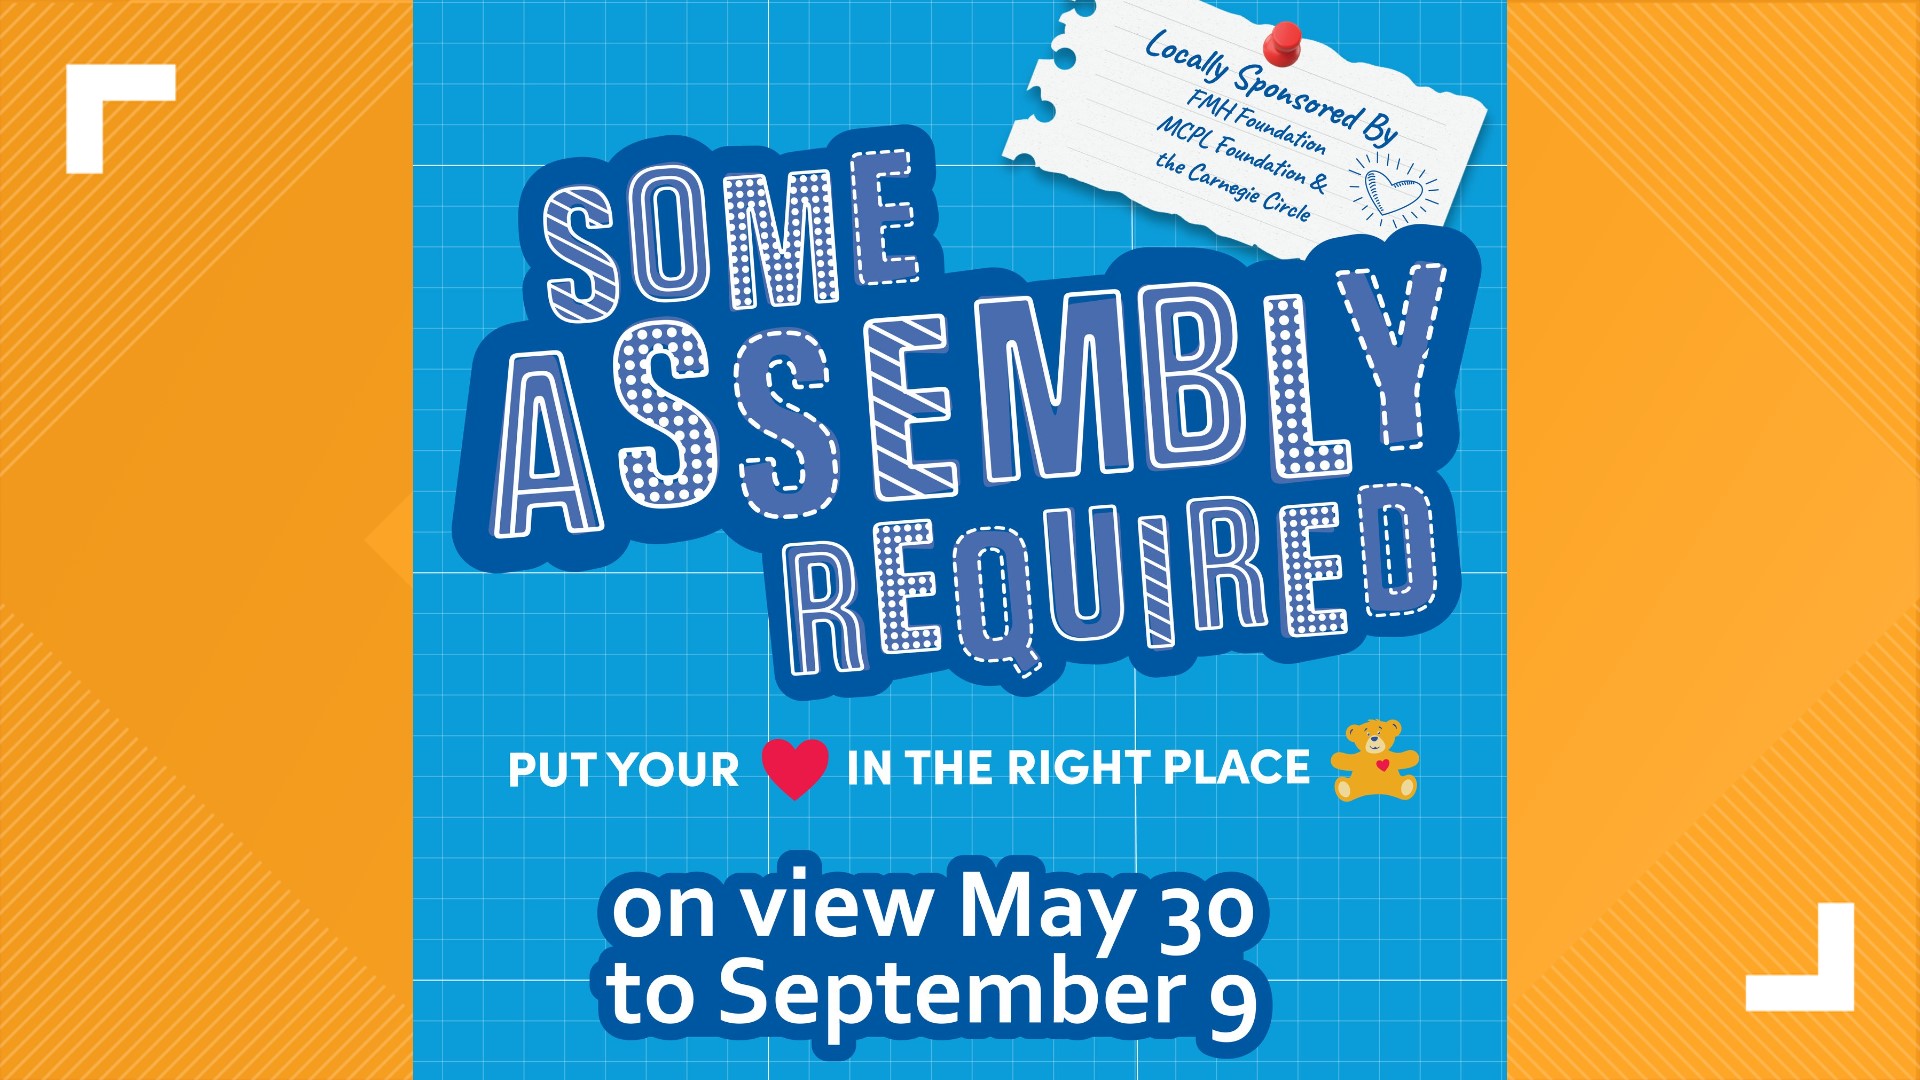 “Some Assembly Required” allows creative thinkers of all ages to see behind the scenes of how different gadgets and gizmos are made.